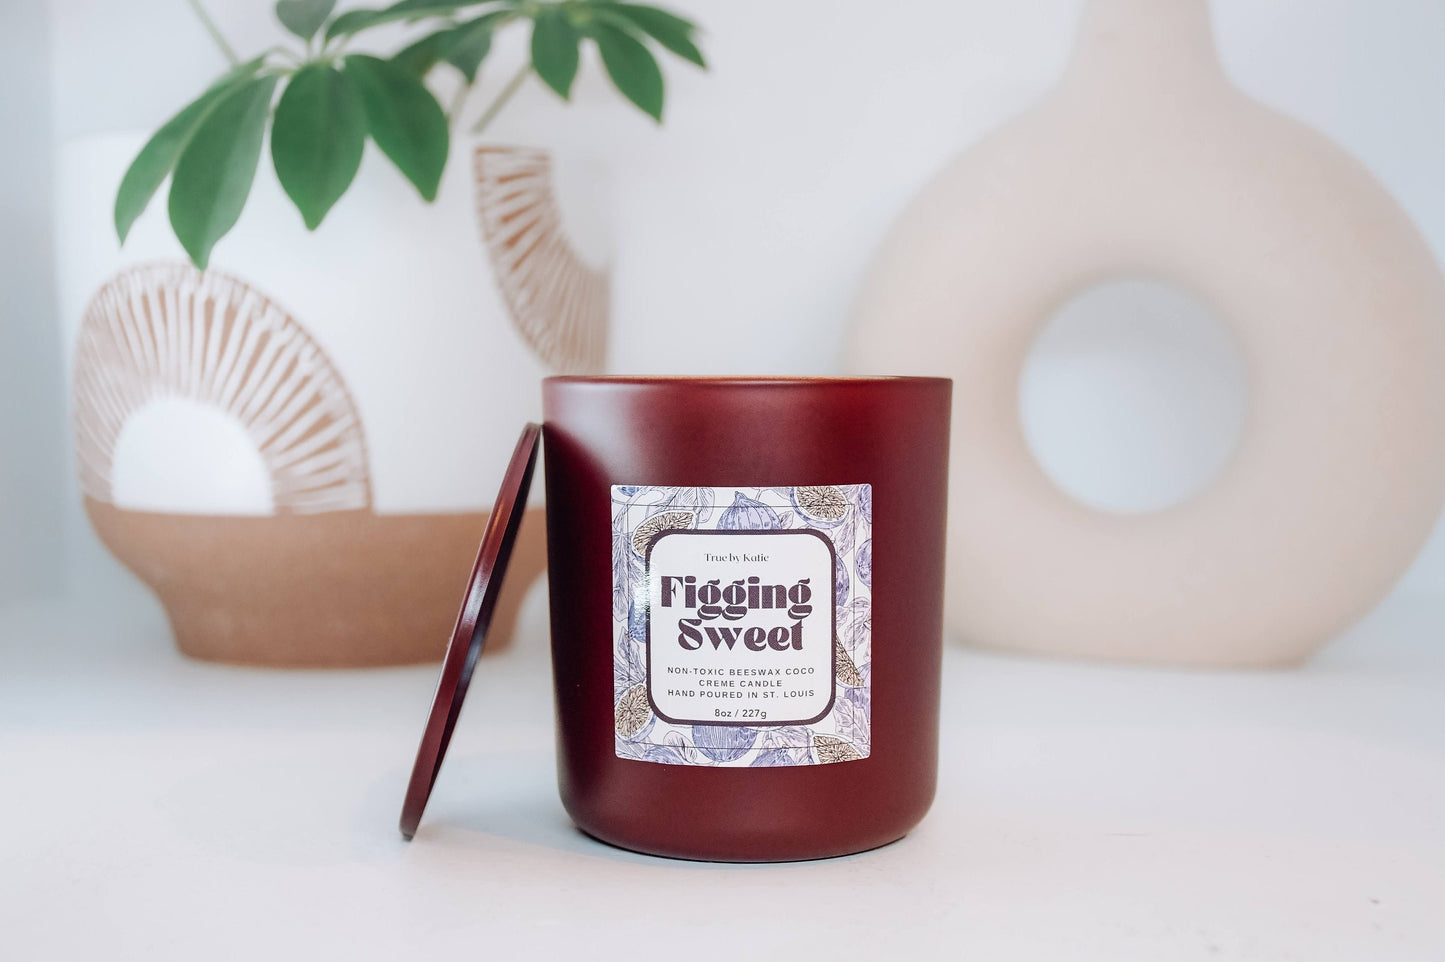 Figging Sweet Refillable Beeswax Candle